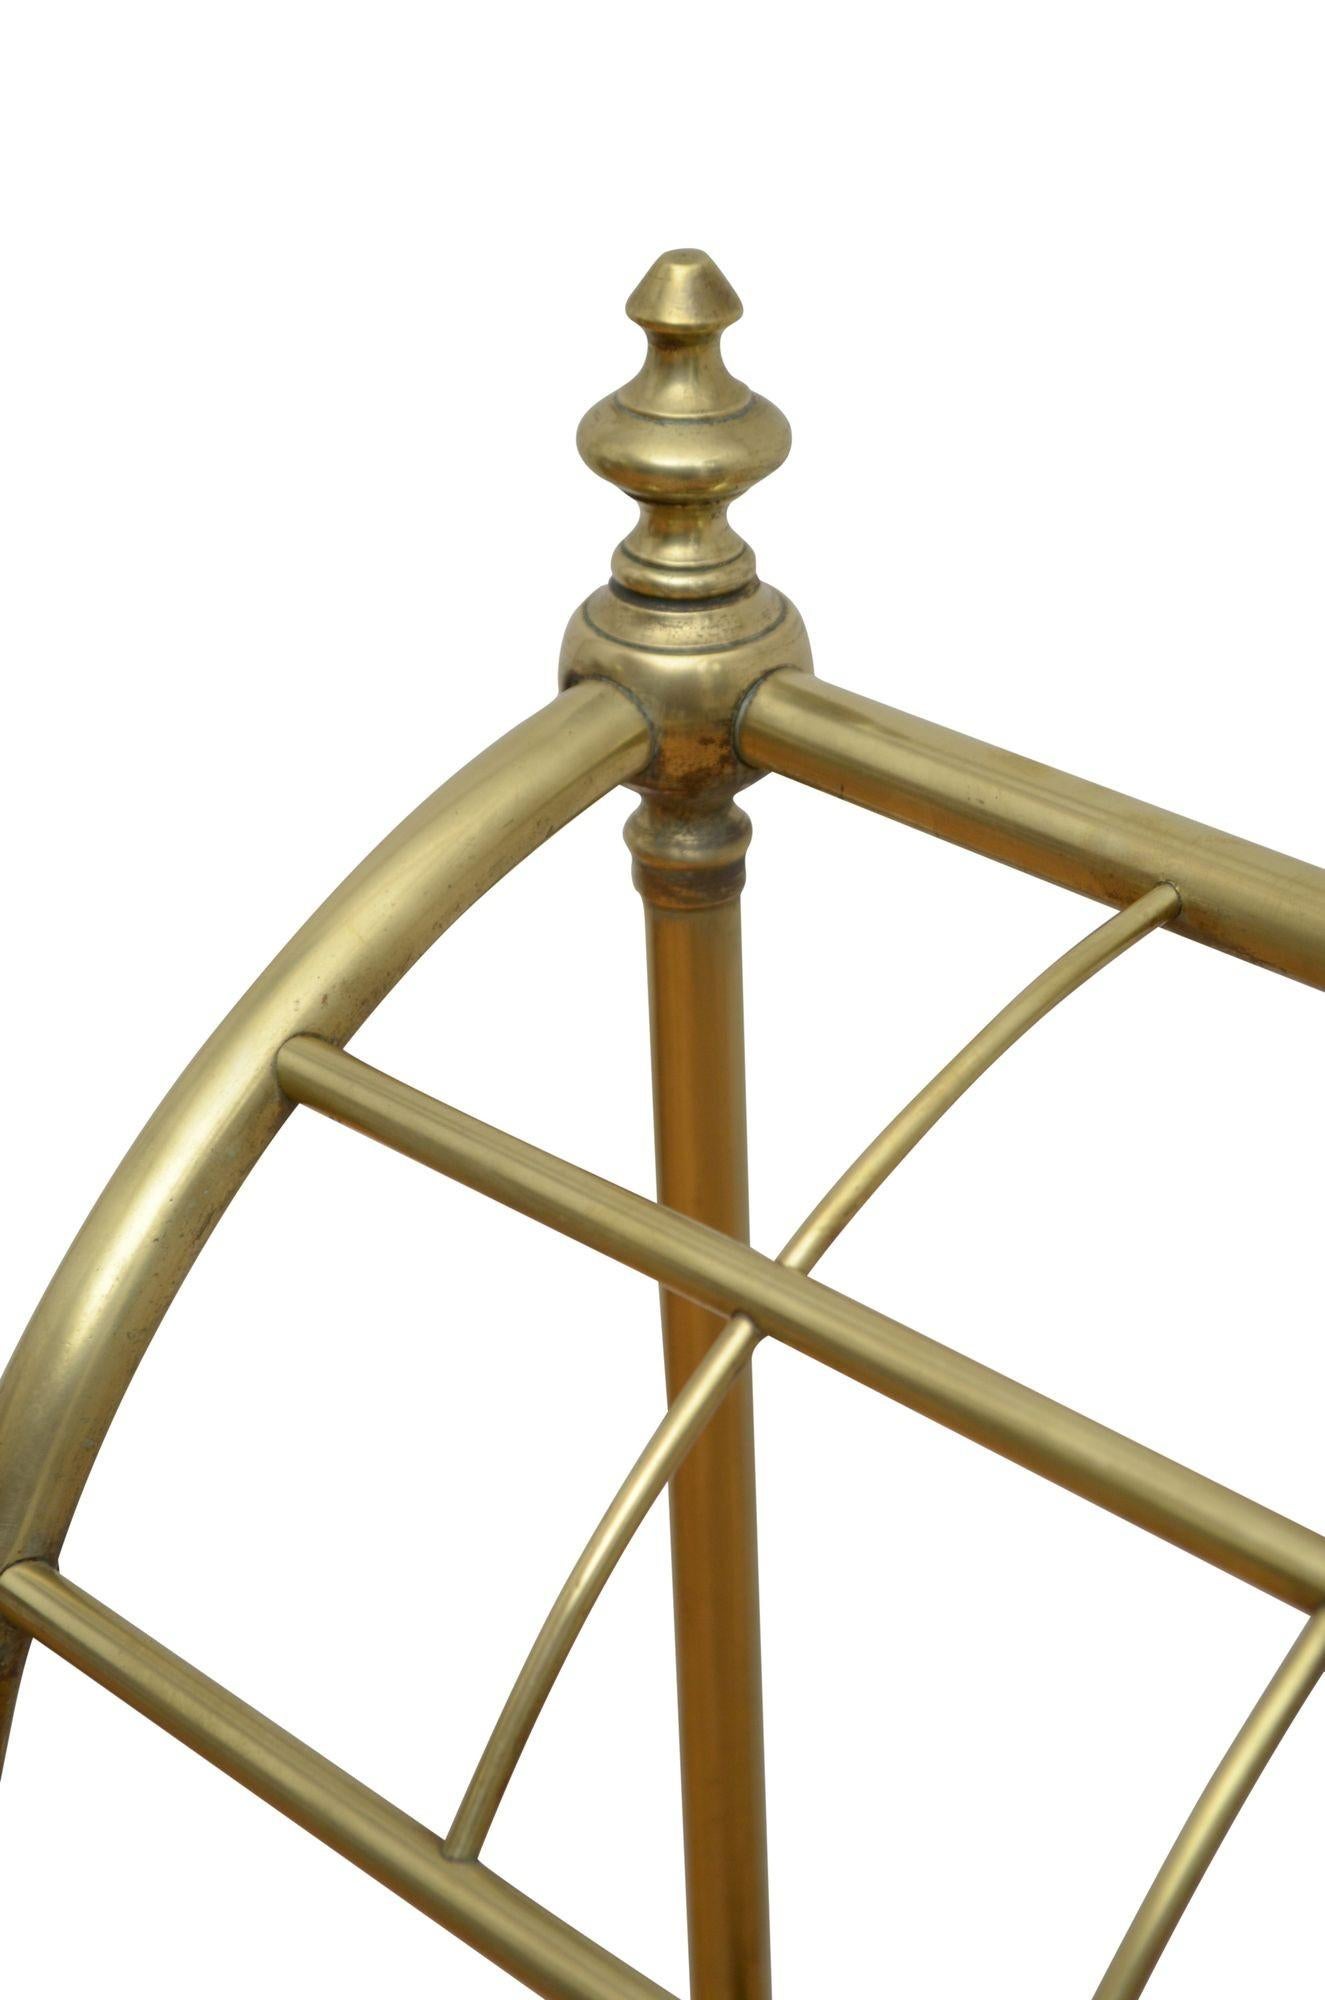 P0264 English brass umbrella stand / walking stick stand round form with six divisions, two decorative finals and removable drip tray in cast iron base. This antique umbrella stand retains its original finish, patina and antique character, all in